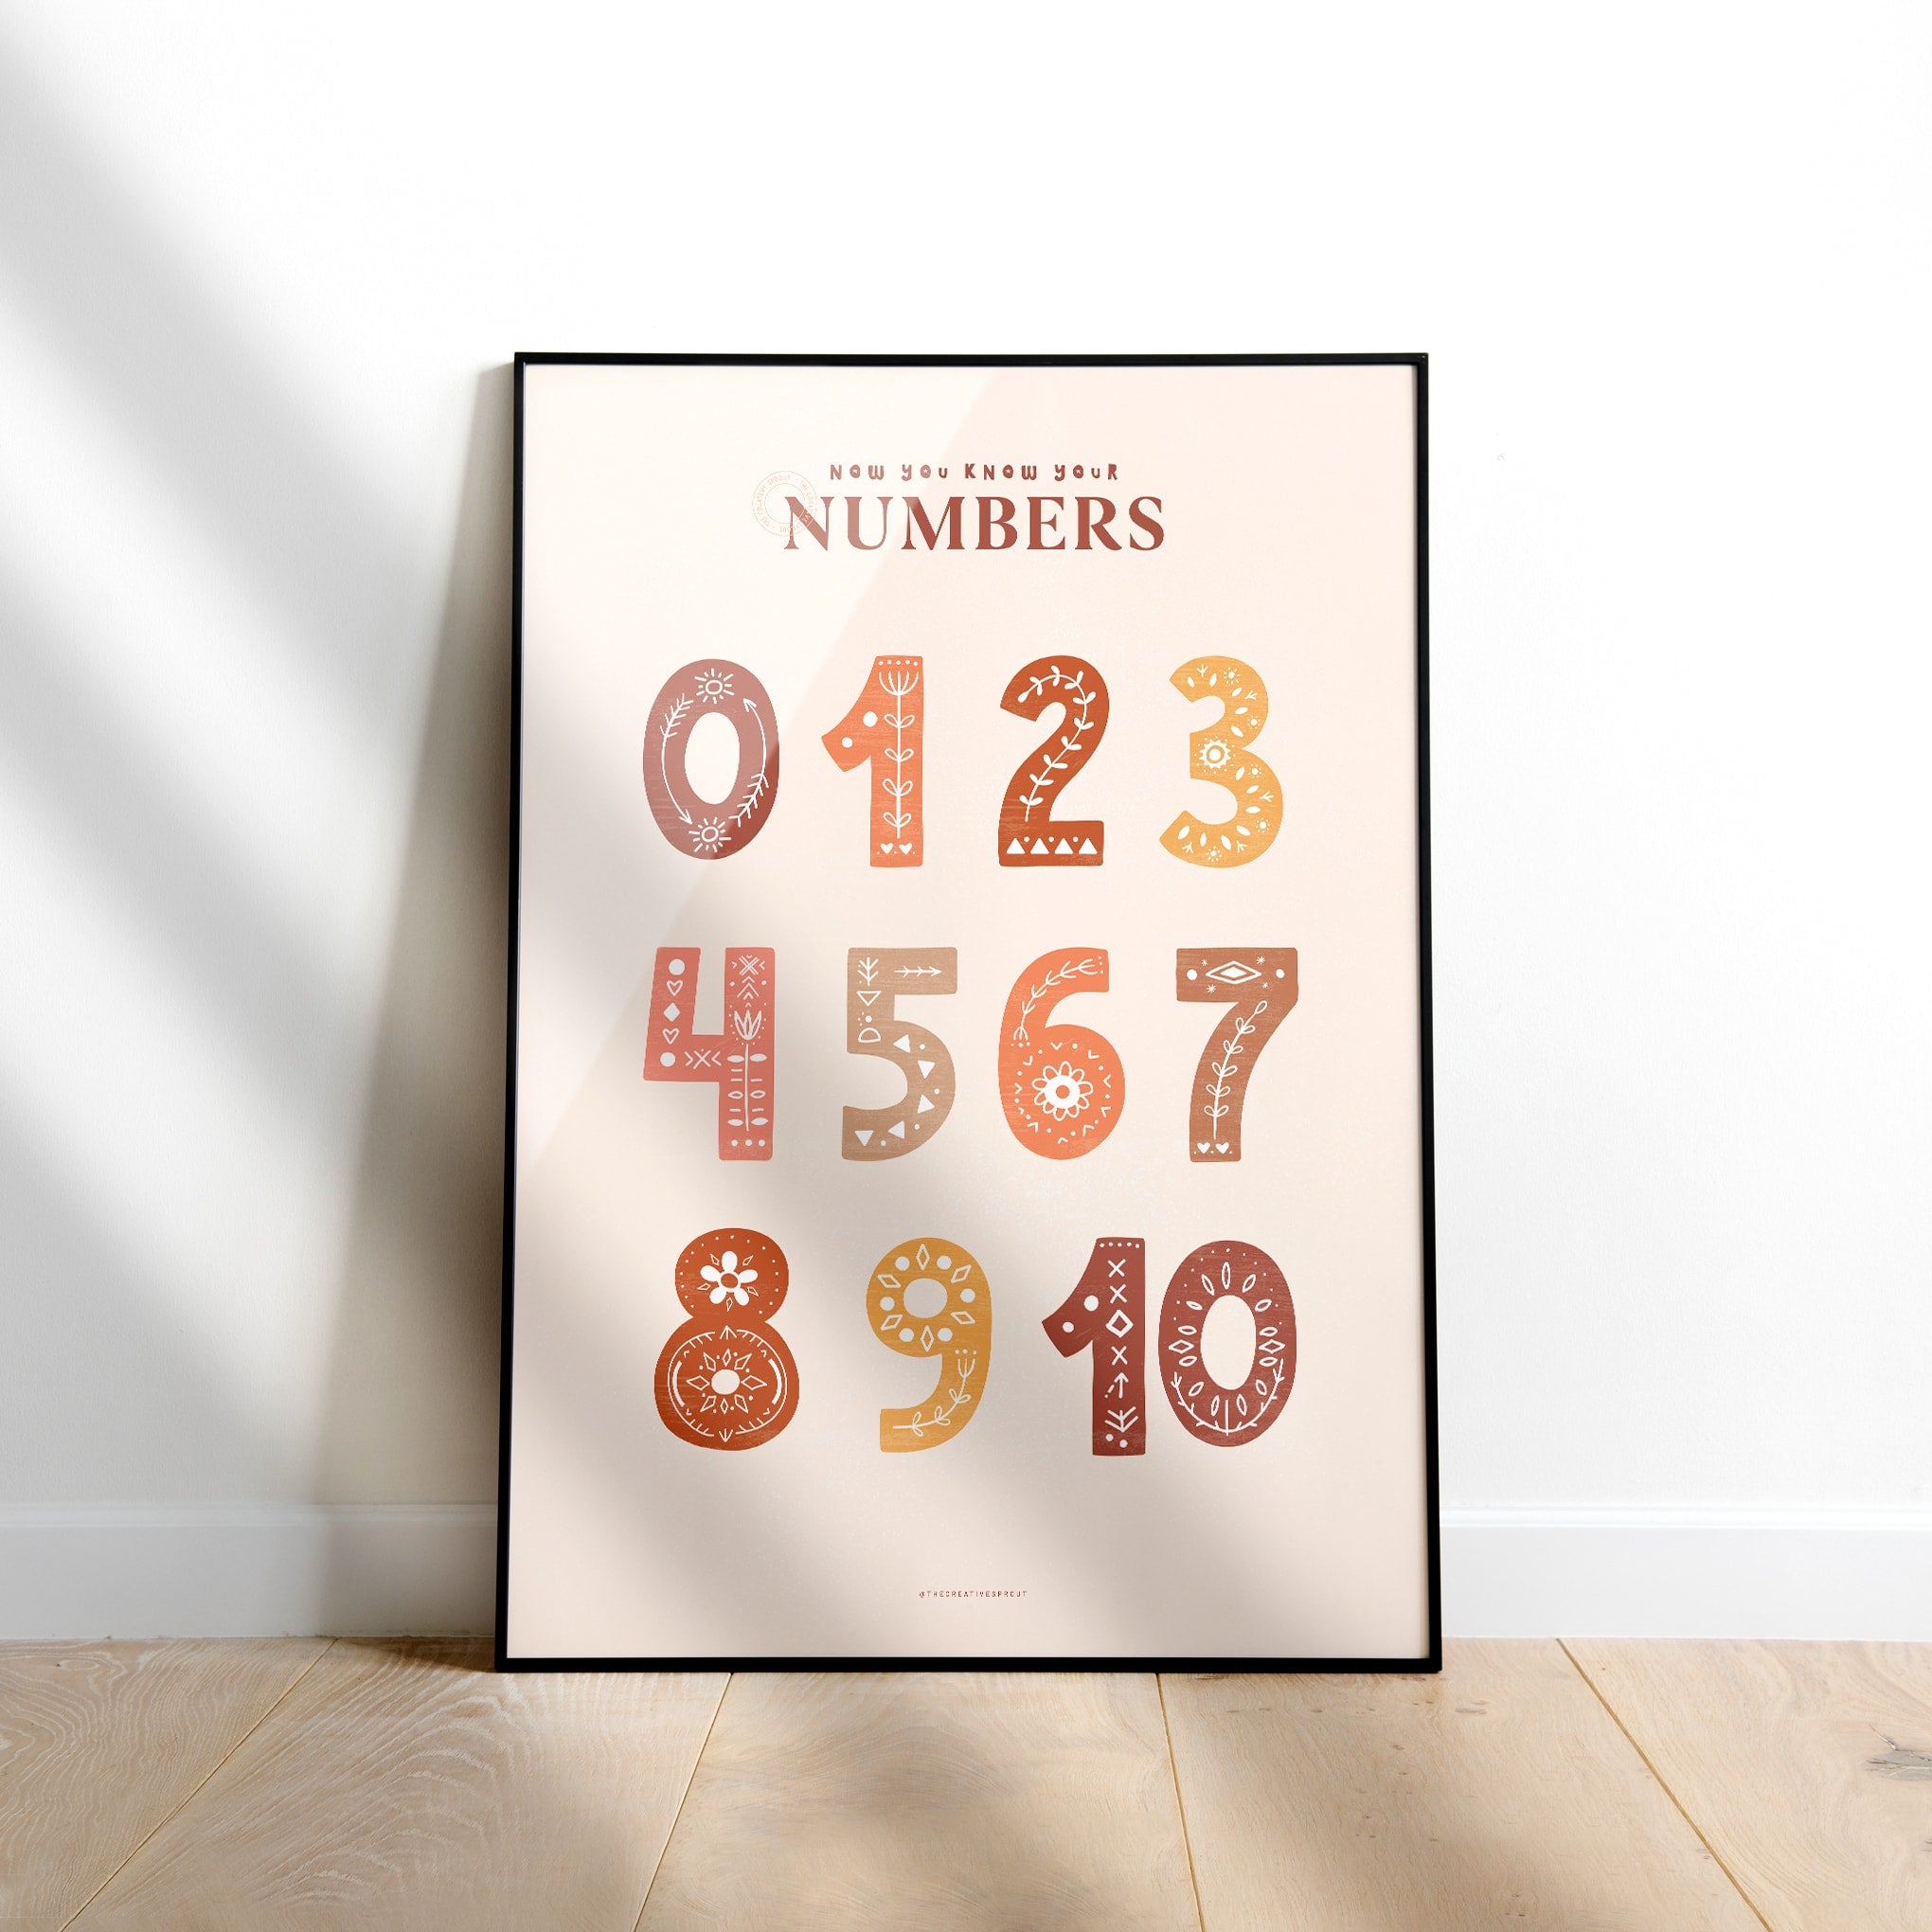 framed numbers poster for kids showing numbers 0-10 in boho style